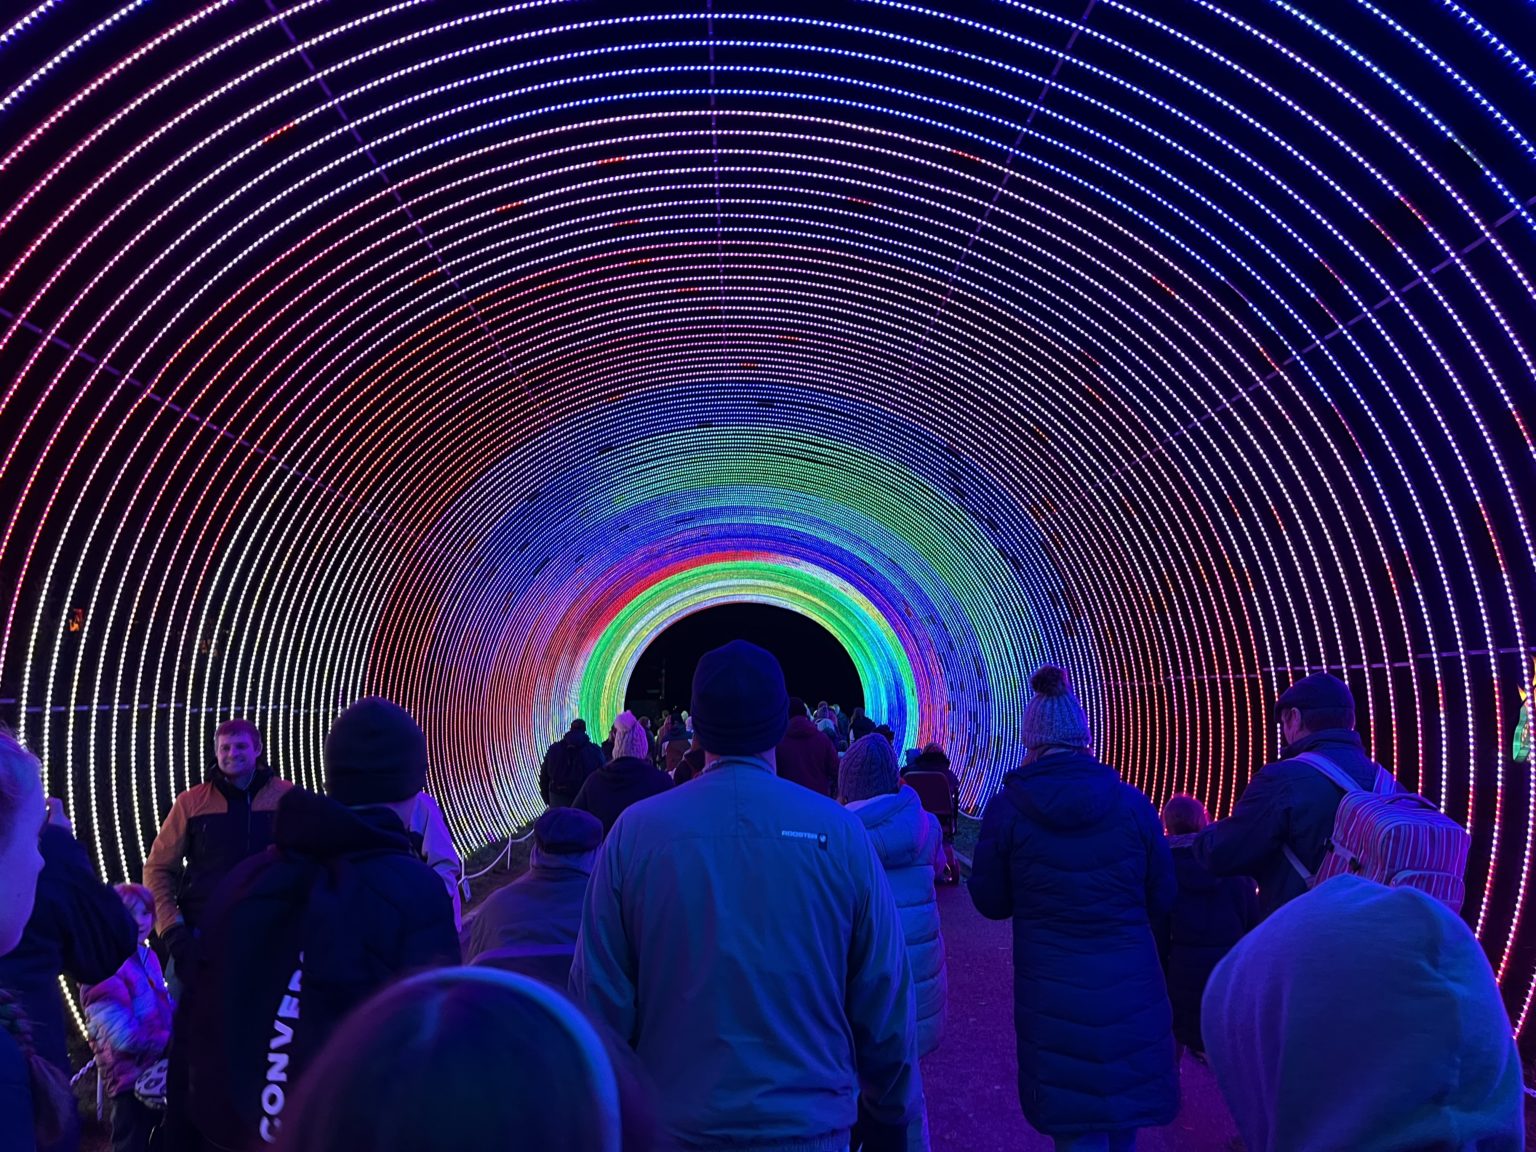 Longleat Festival Of Light delivers a golden ticket experience